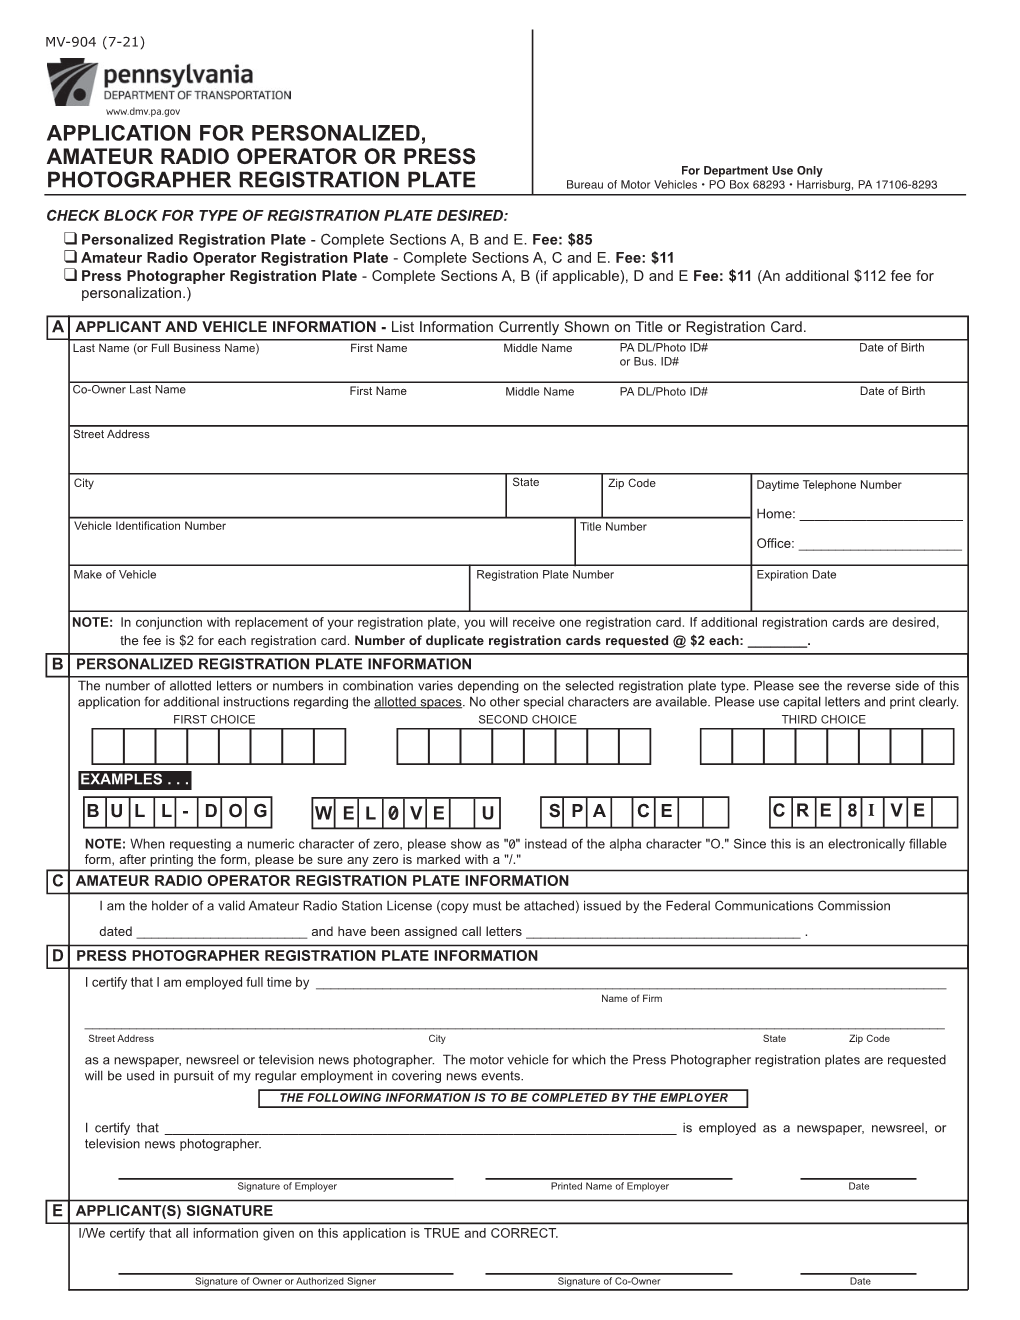 Application for Personalized, Amateur Radio Operator Or